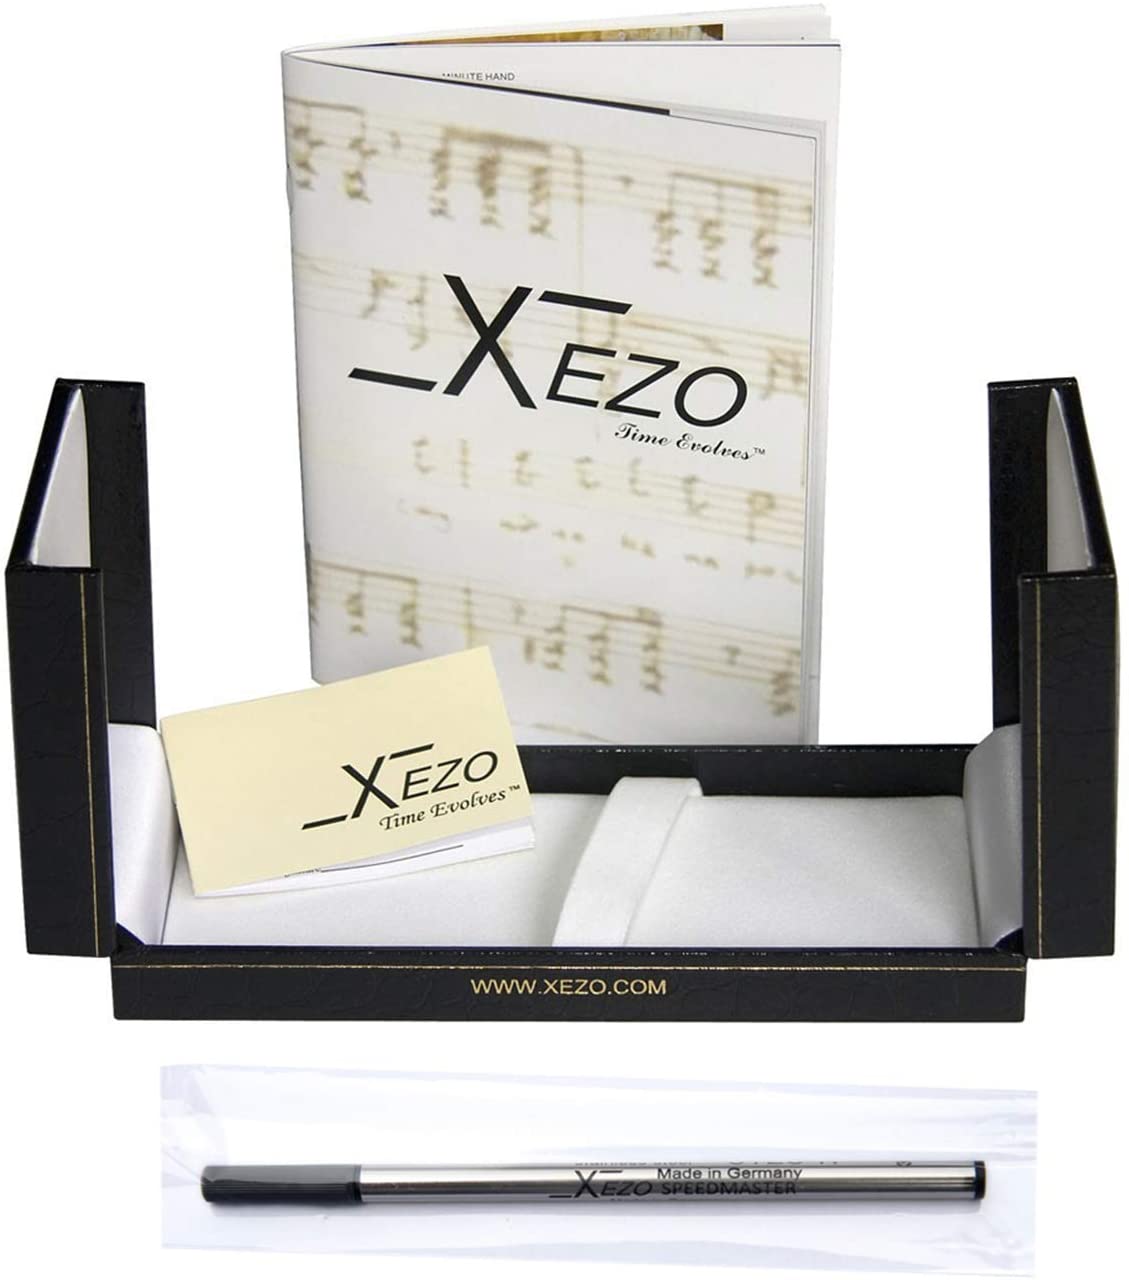 Xezo - Black gift box, certificate, manual, and gel ink cartridge of the Maestro MOP Sea Shell R rollerball pen